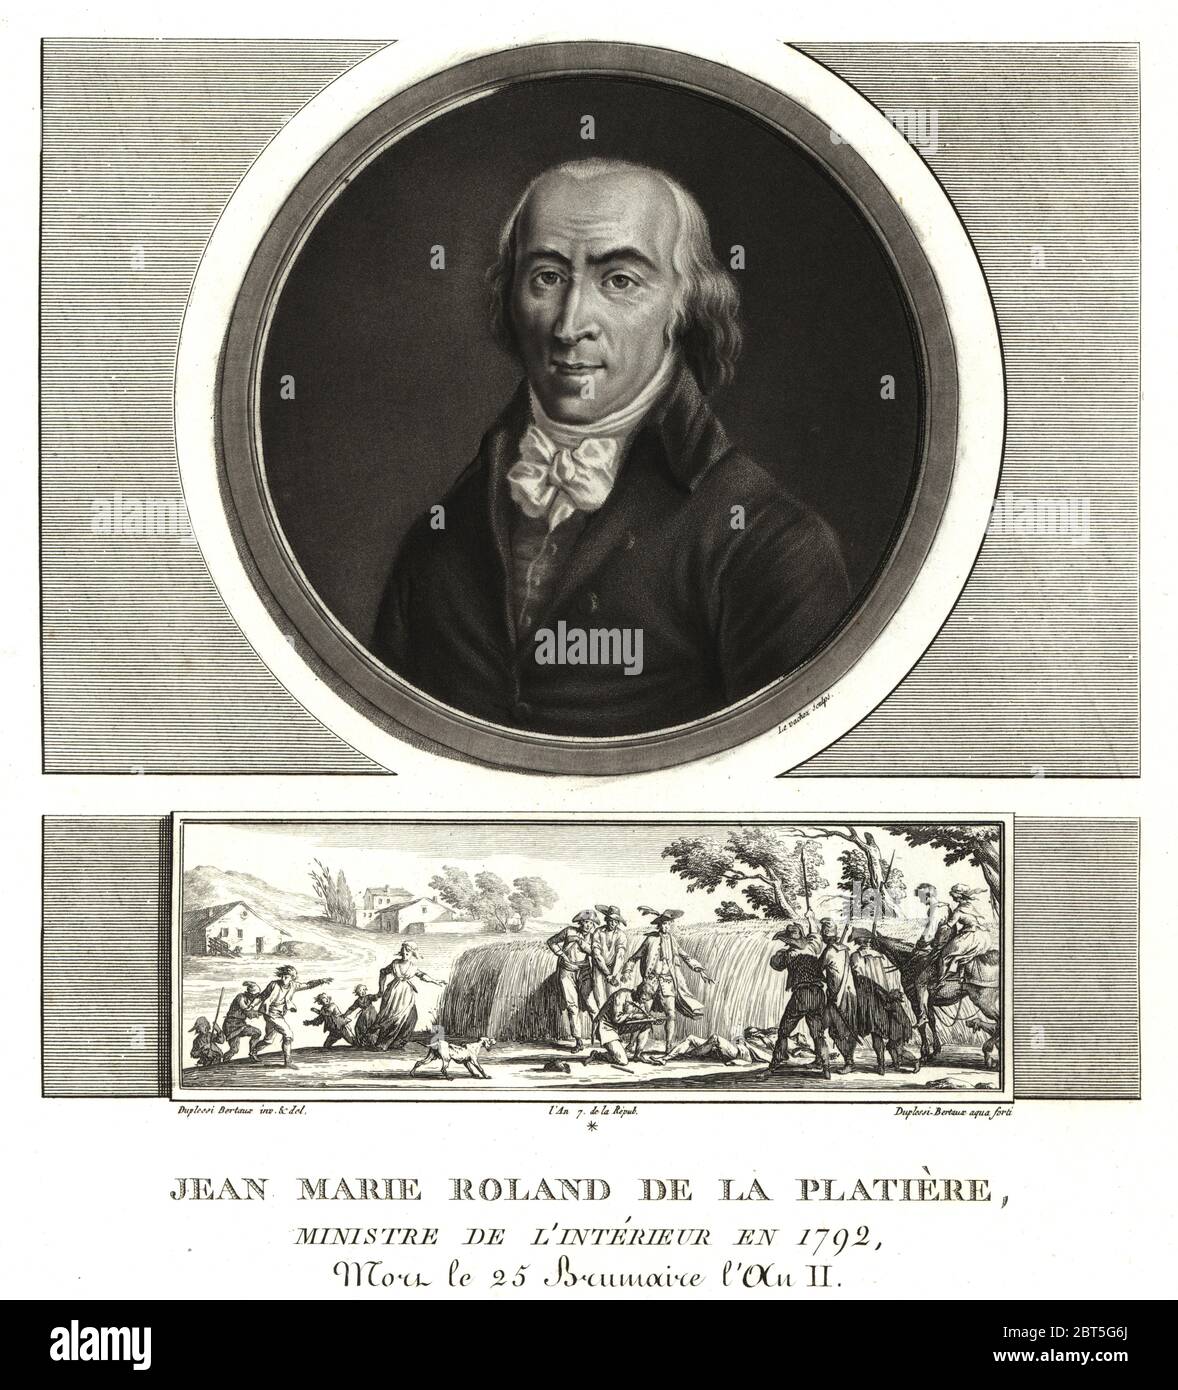 Jean Marie Roland de la Platiere, Minister of the Interior, 1792. Committed suicide after the execution of his wife. Vignette shows the discovery of his corpse in a wheatfield on the road to Rouen. Mezzotint drawn and engraved by Jean Duplessis-Bertaux from his Collection Complete de 60 Portraits des Personnages qui ont le plus Figure dans la Revolution Francaise, Auber, Pairs, 1800. Portrait engraved by Charles Francois Gabriel Levachez. Stock Photo